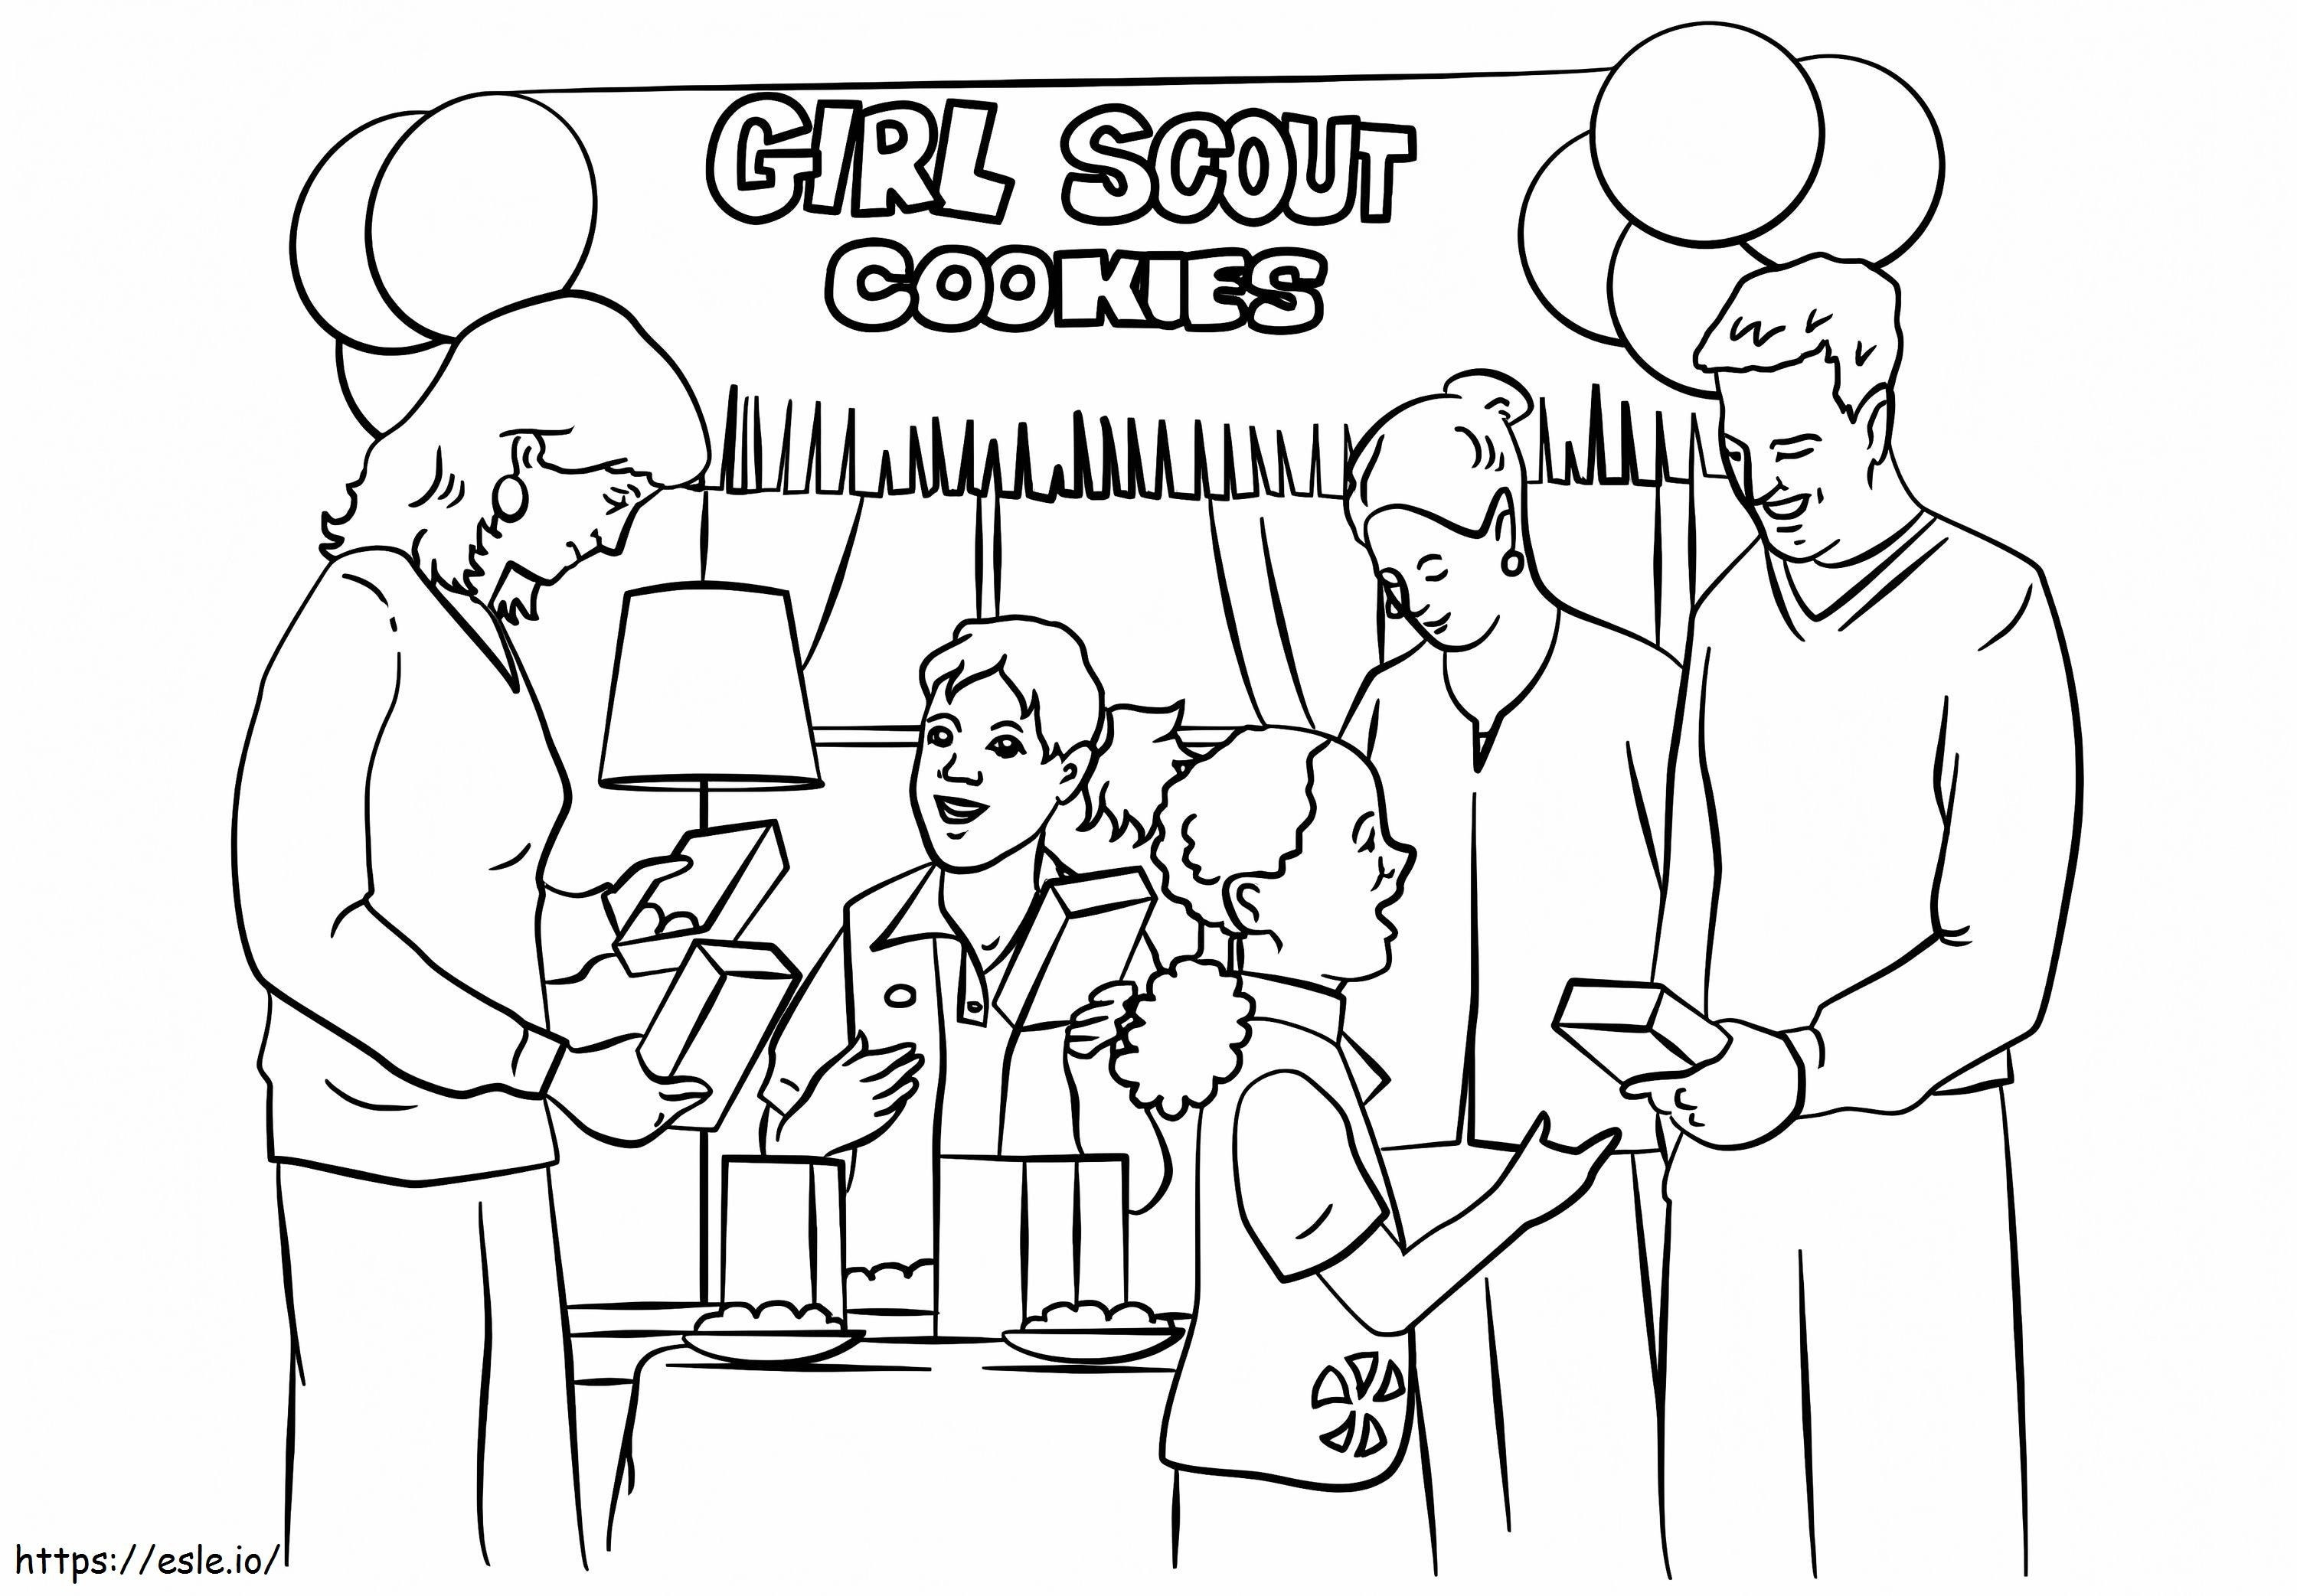 Girl Scout Cookies coloring page